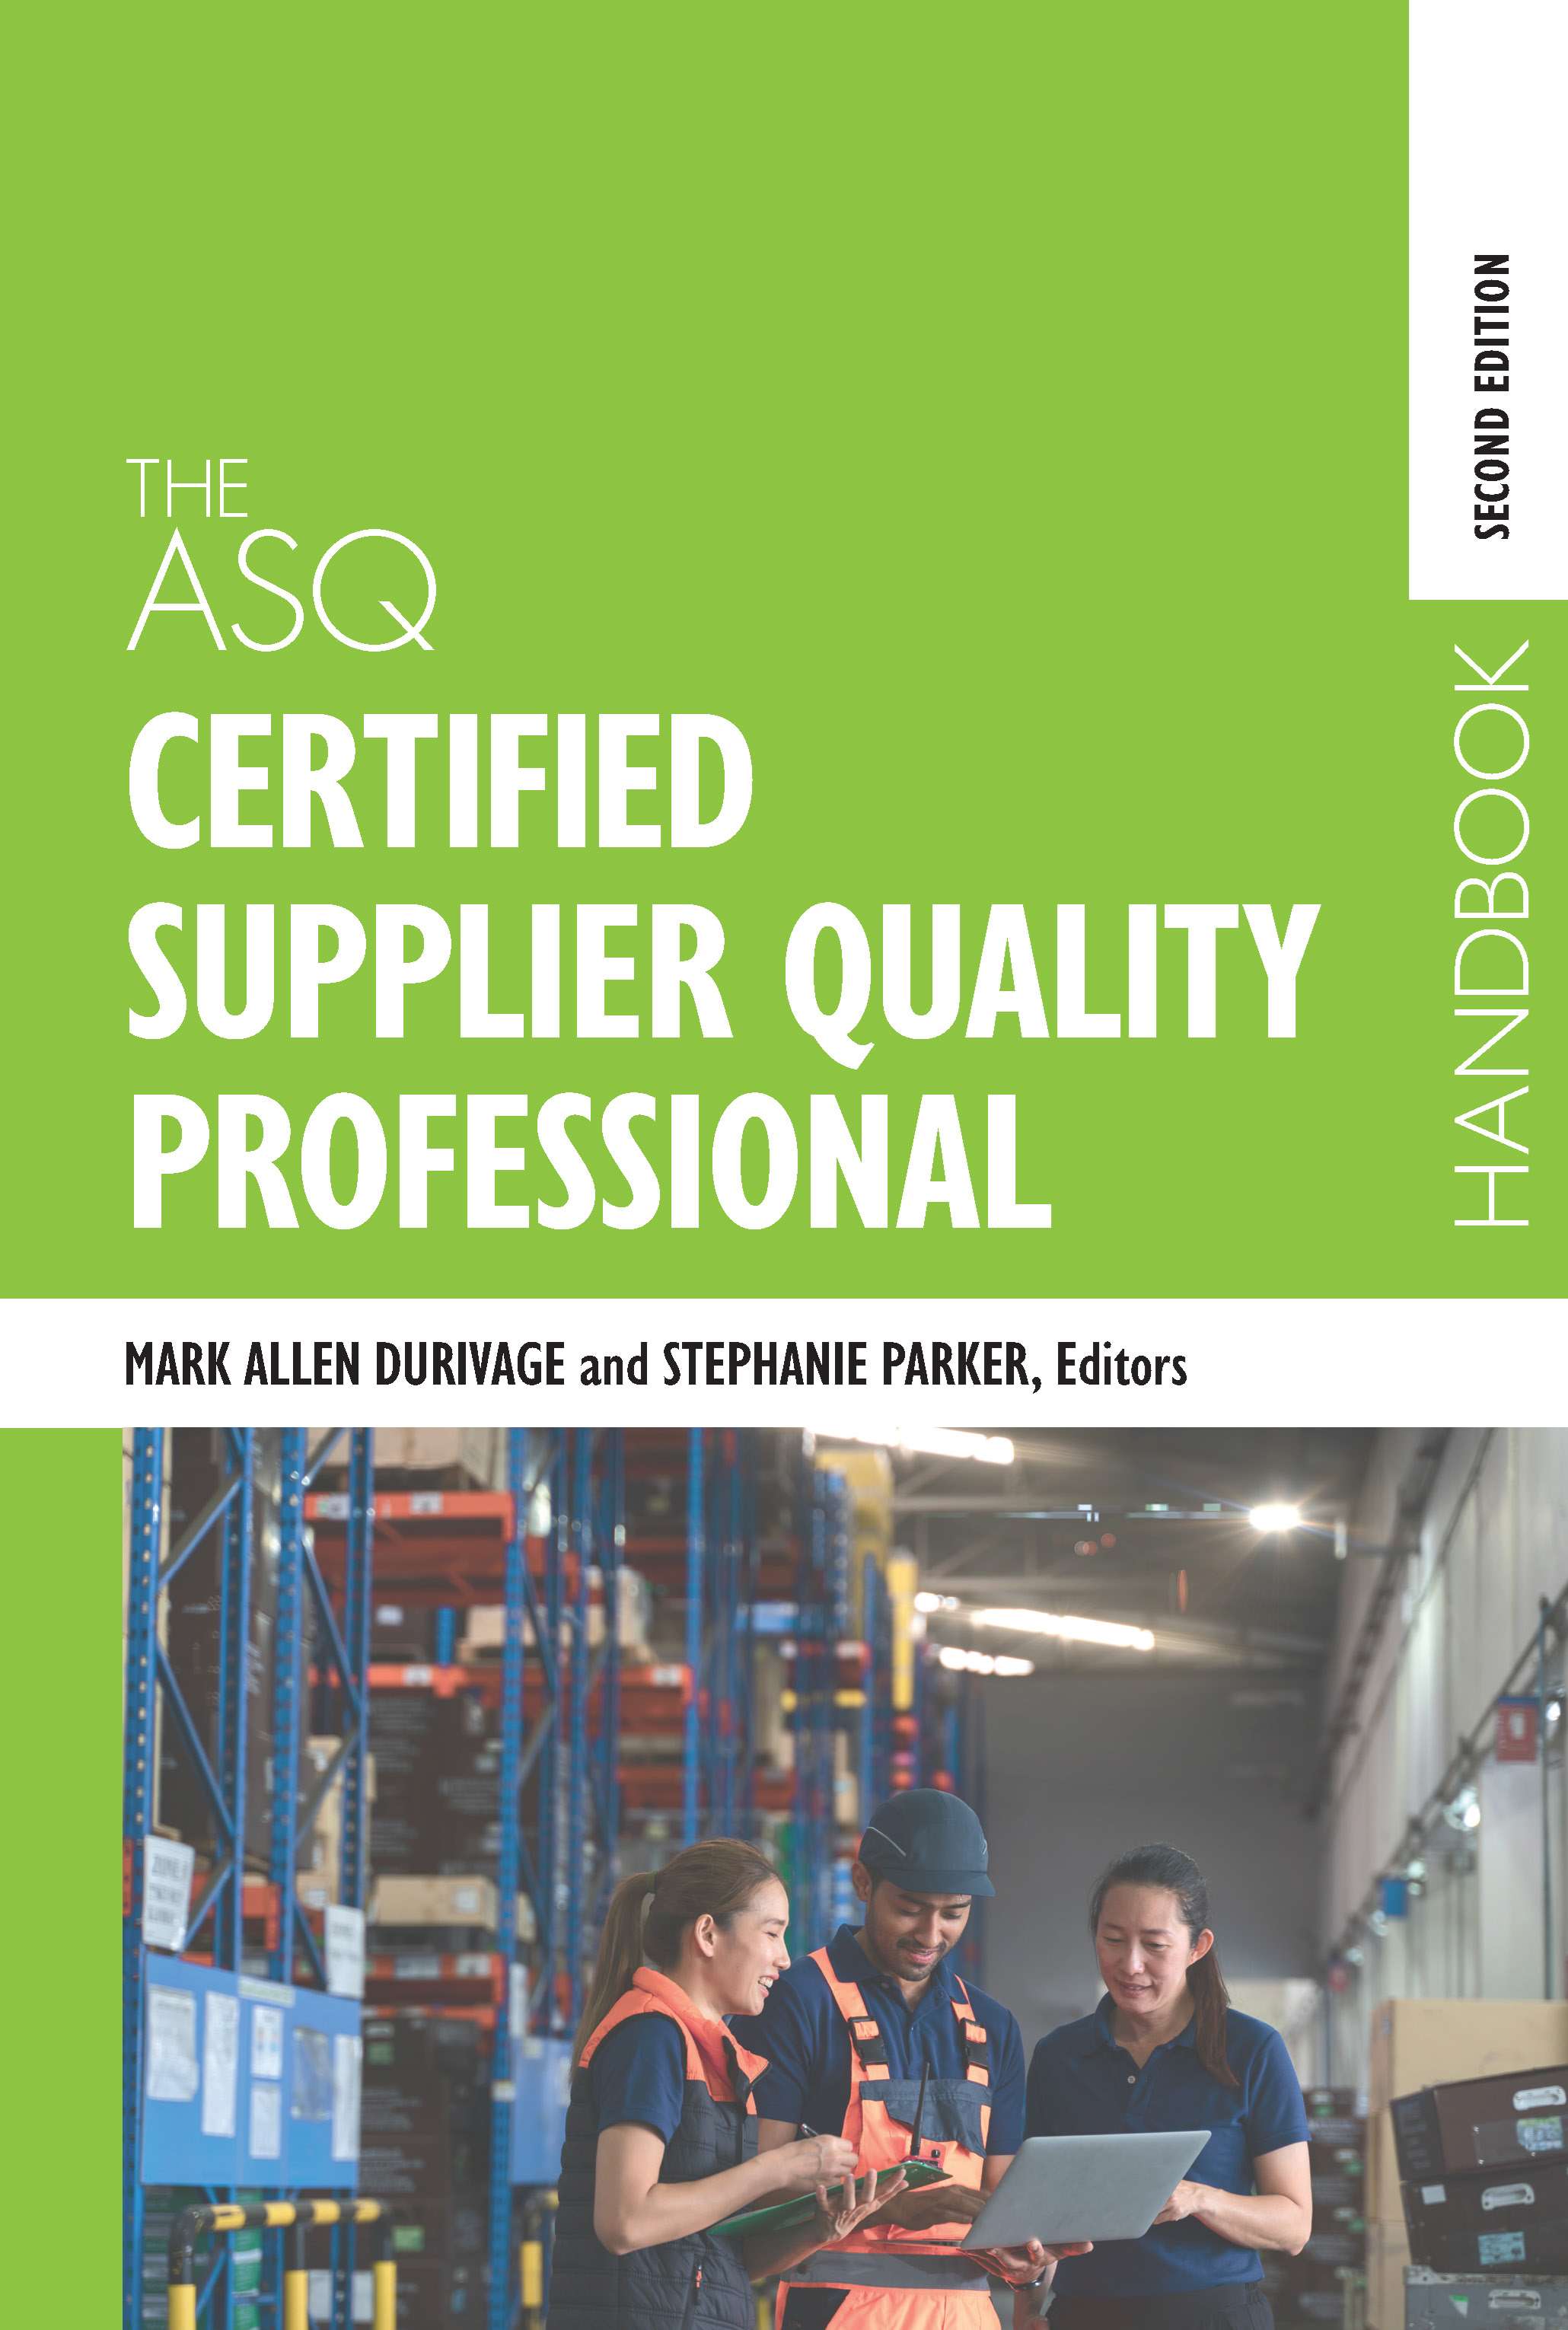 The ASQ Certified Supplier Quality Professional Handbook, Second Edition